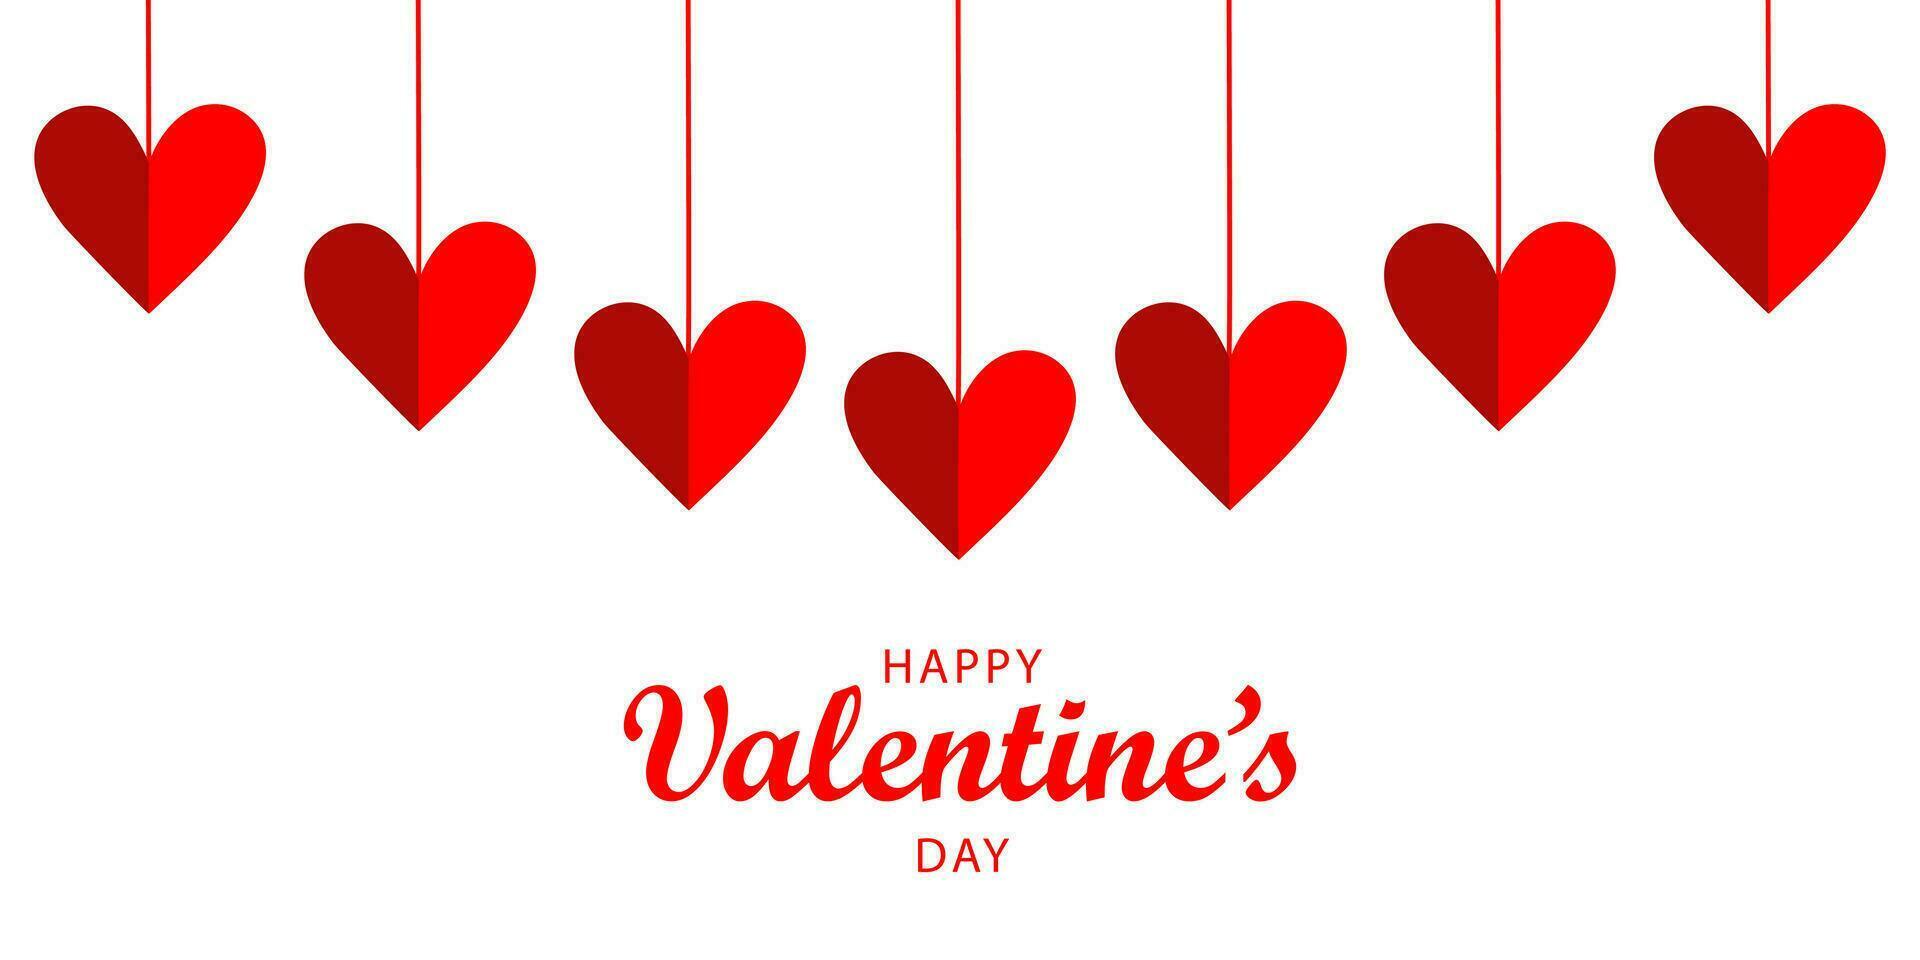 Happy Valentine's Day web banner on a white background with red garland of hearts, with a place for your text. vector